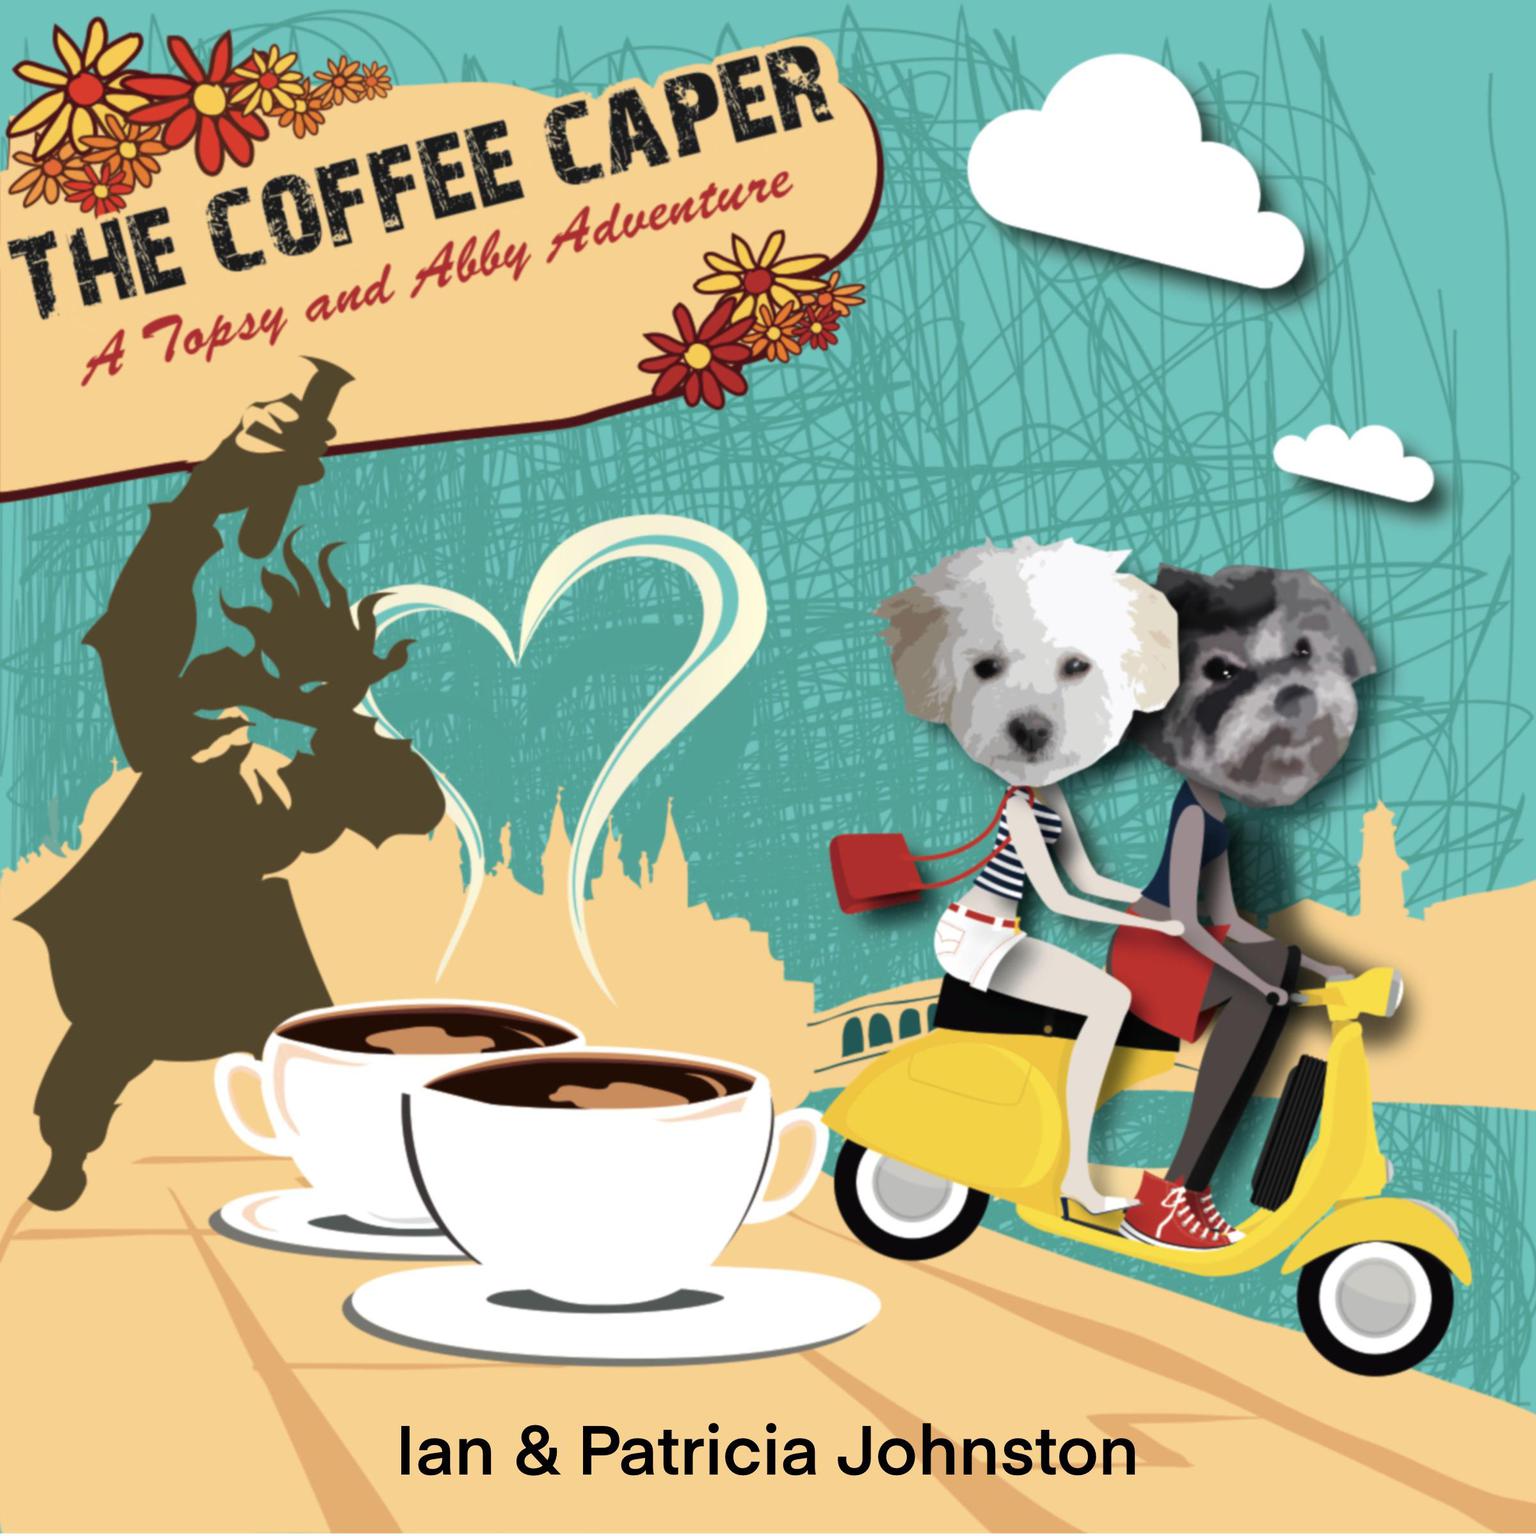 The Coffee Caper Audiobook, by Ian Johnston